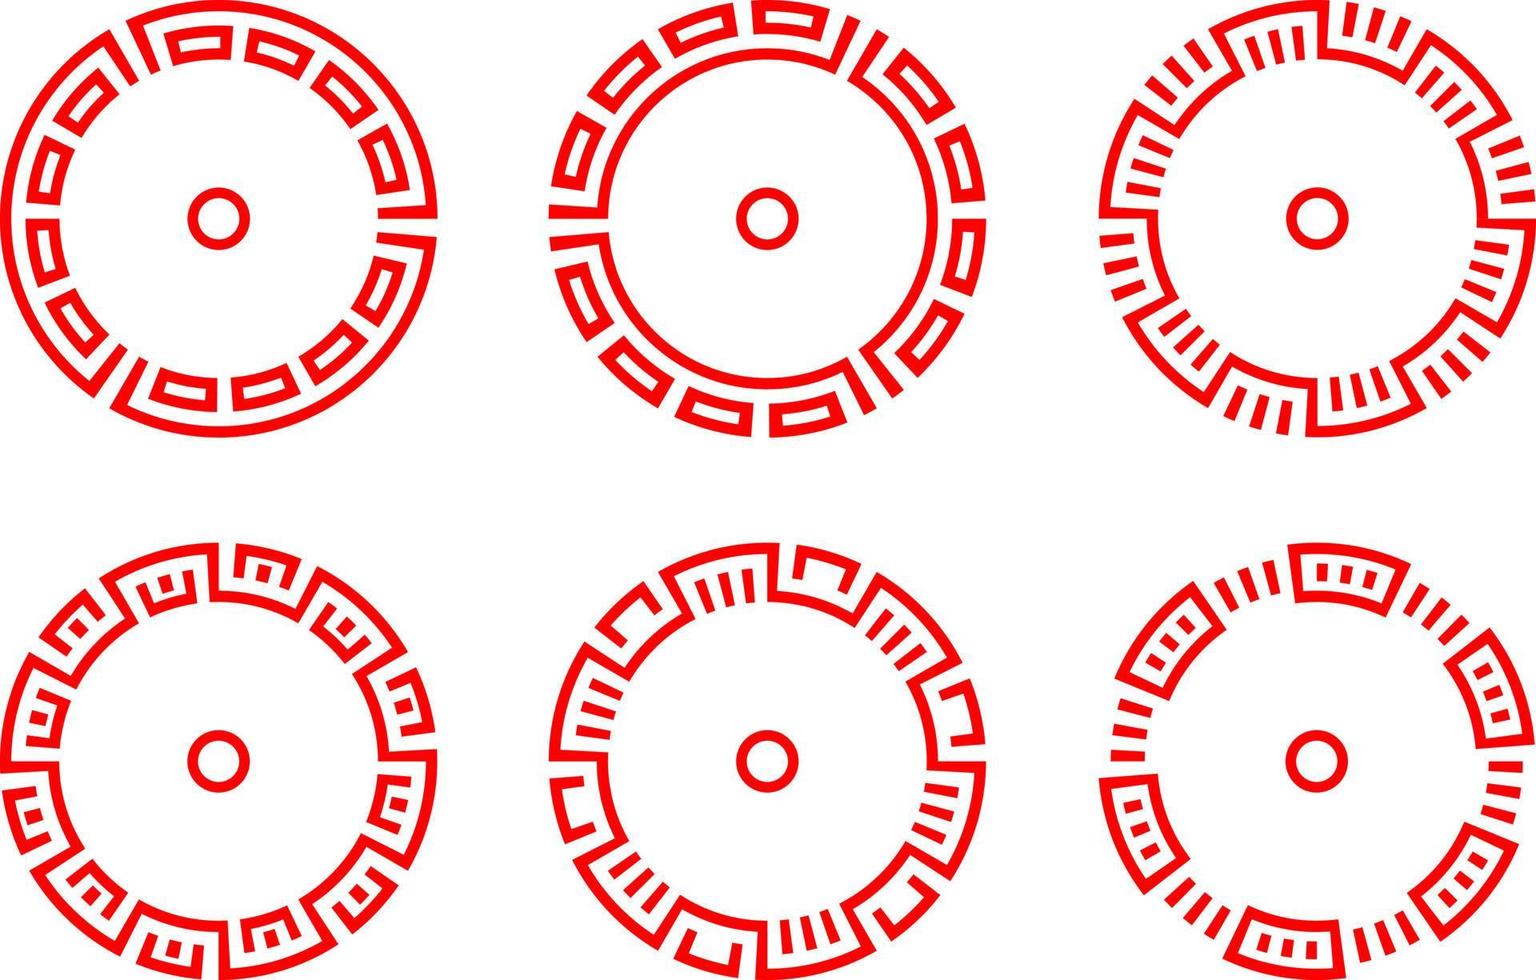 Chinese red circle frame set vector design.